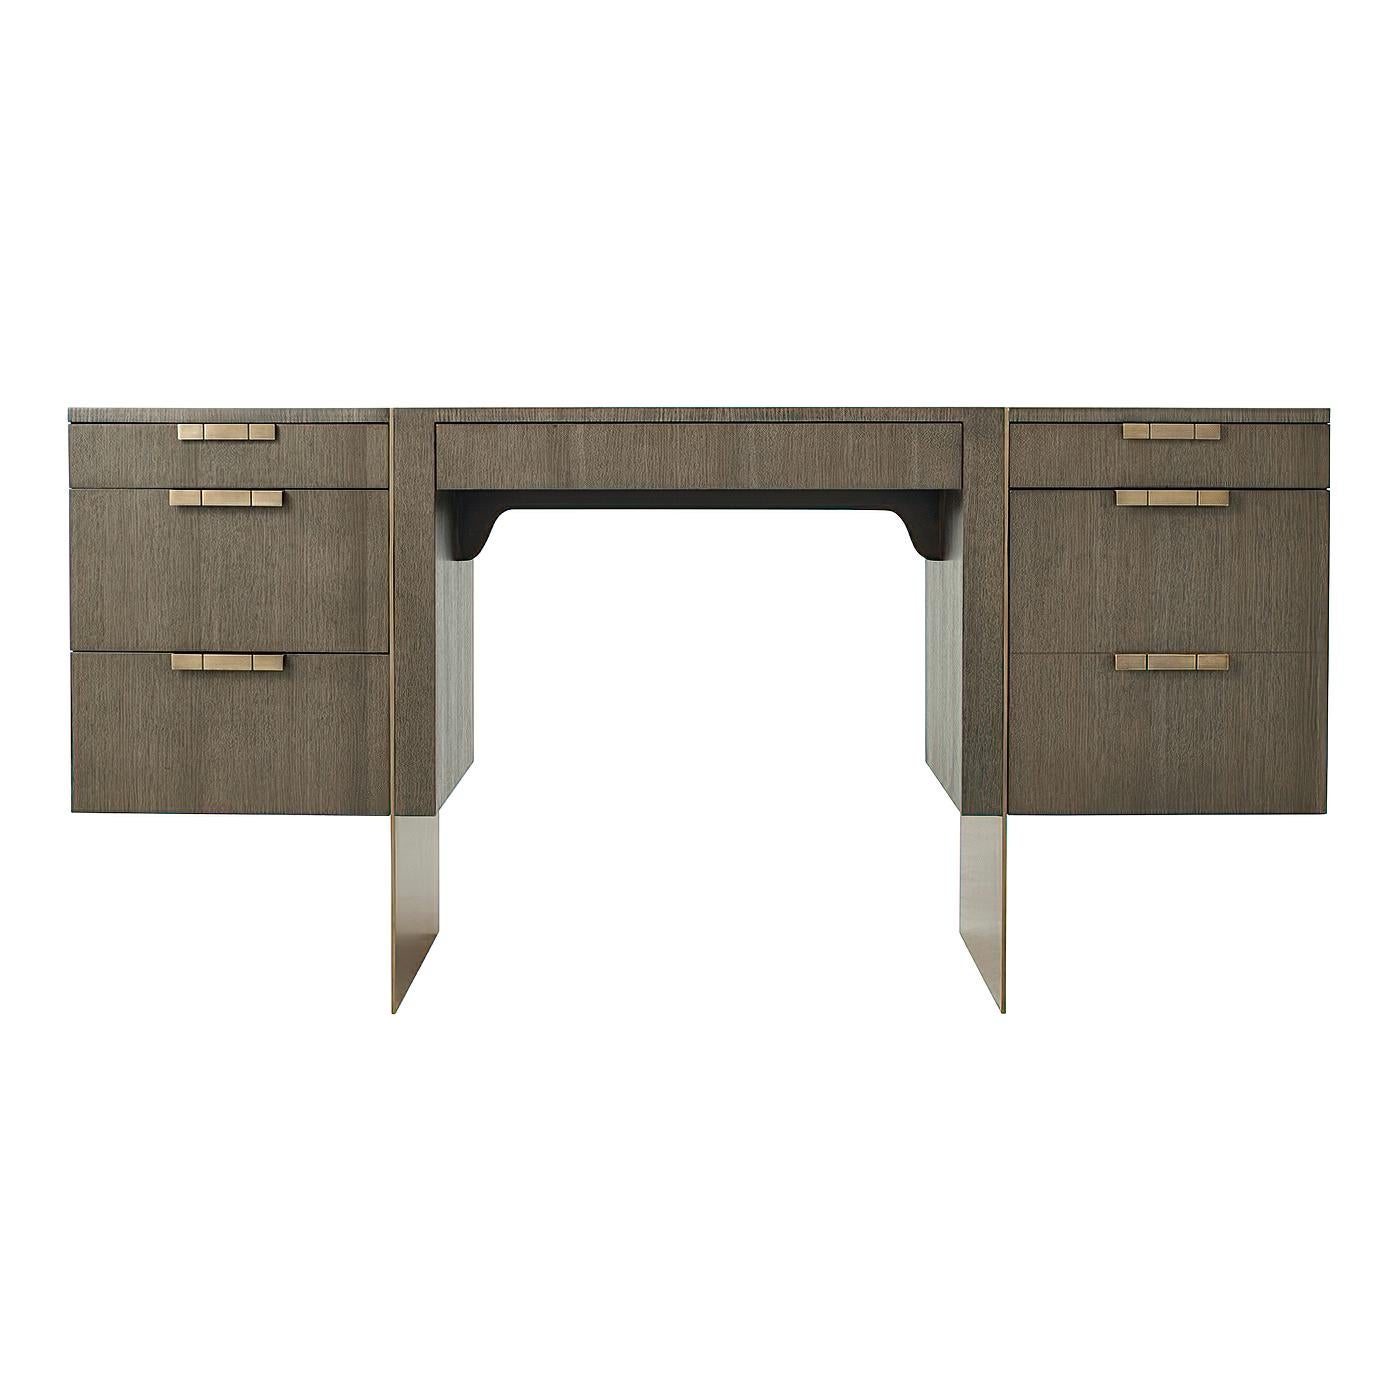 A modern pedestal desk with quartered oak veneer and with a basalt finish. With brass slab legs and handles having a long center drawer and three graduated drawers to your left, and one drawer above a filing drawer to your right. Also with self